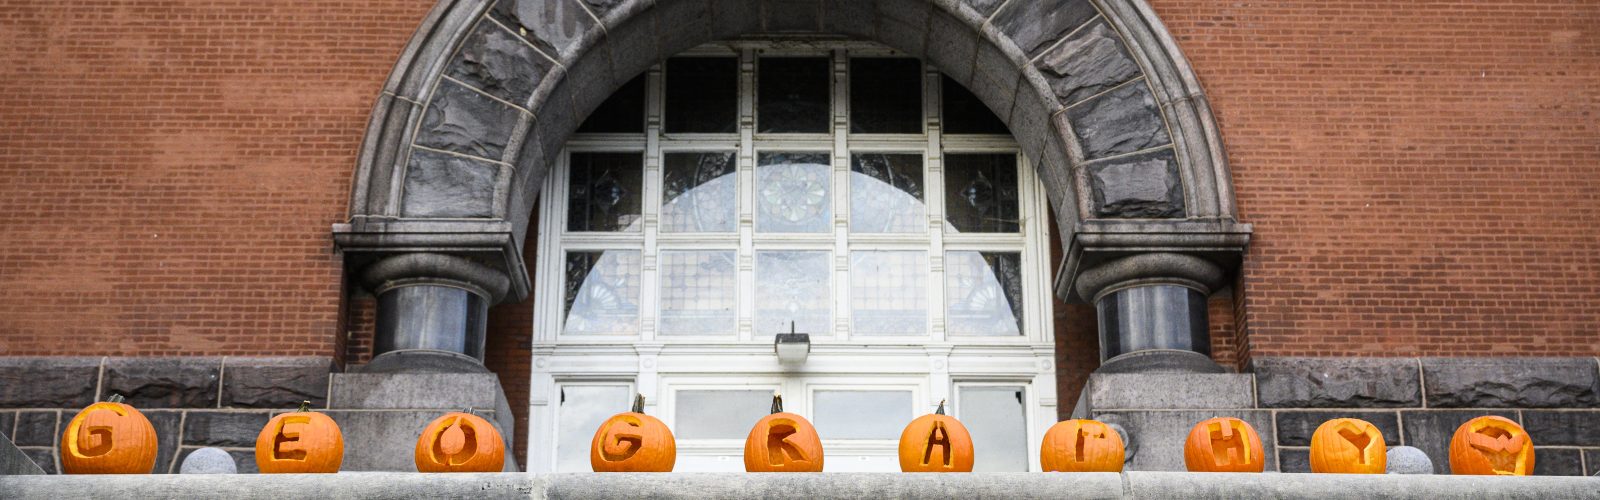 Carved pumpkins spell out GEOGRAPHY in front of Science Hall during a fall day on the University of Wisconsin-Madison campus on Oct. 20, 2021. (Photo by Althea Dotzour / UW-Madison)